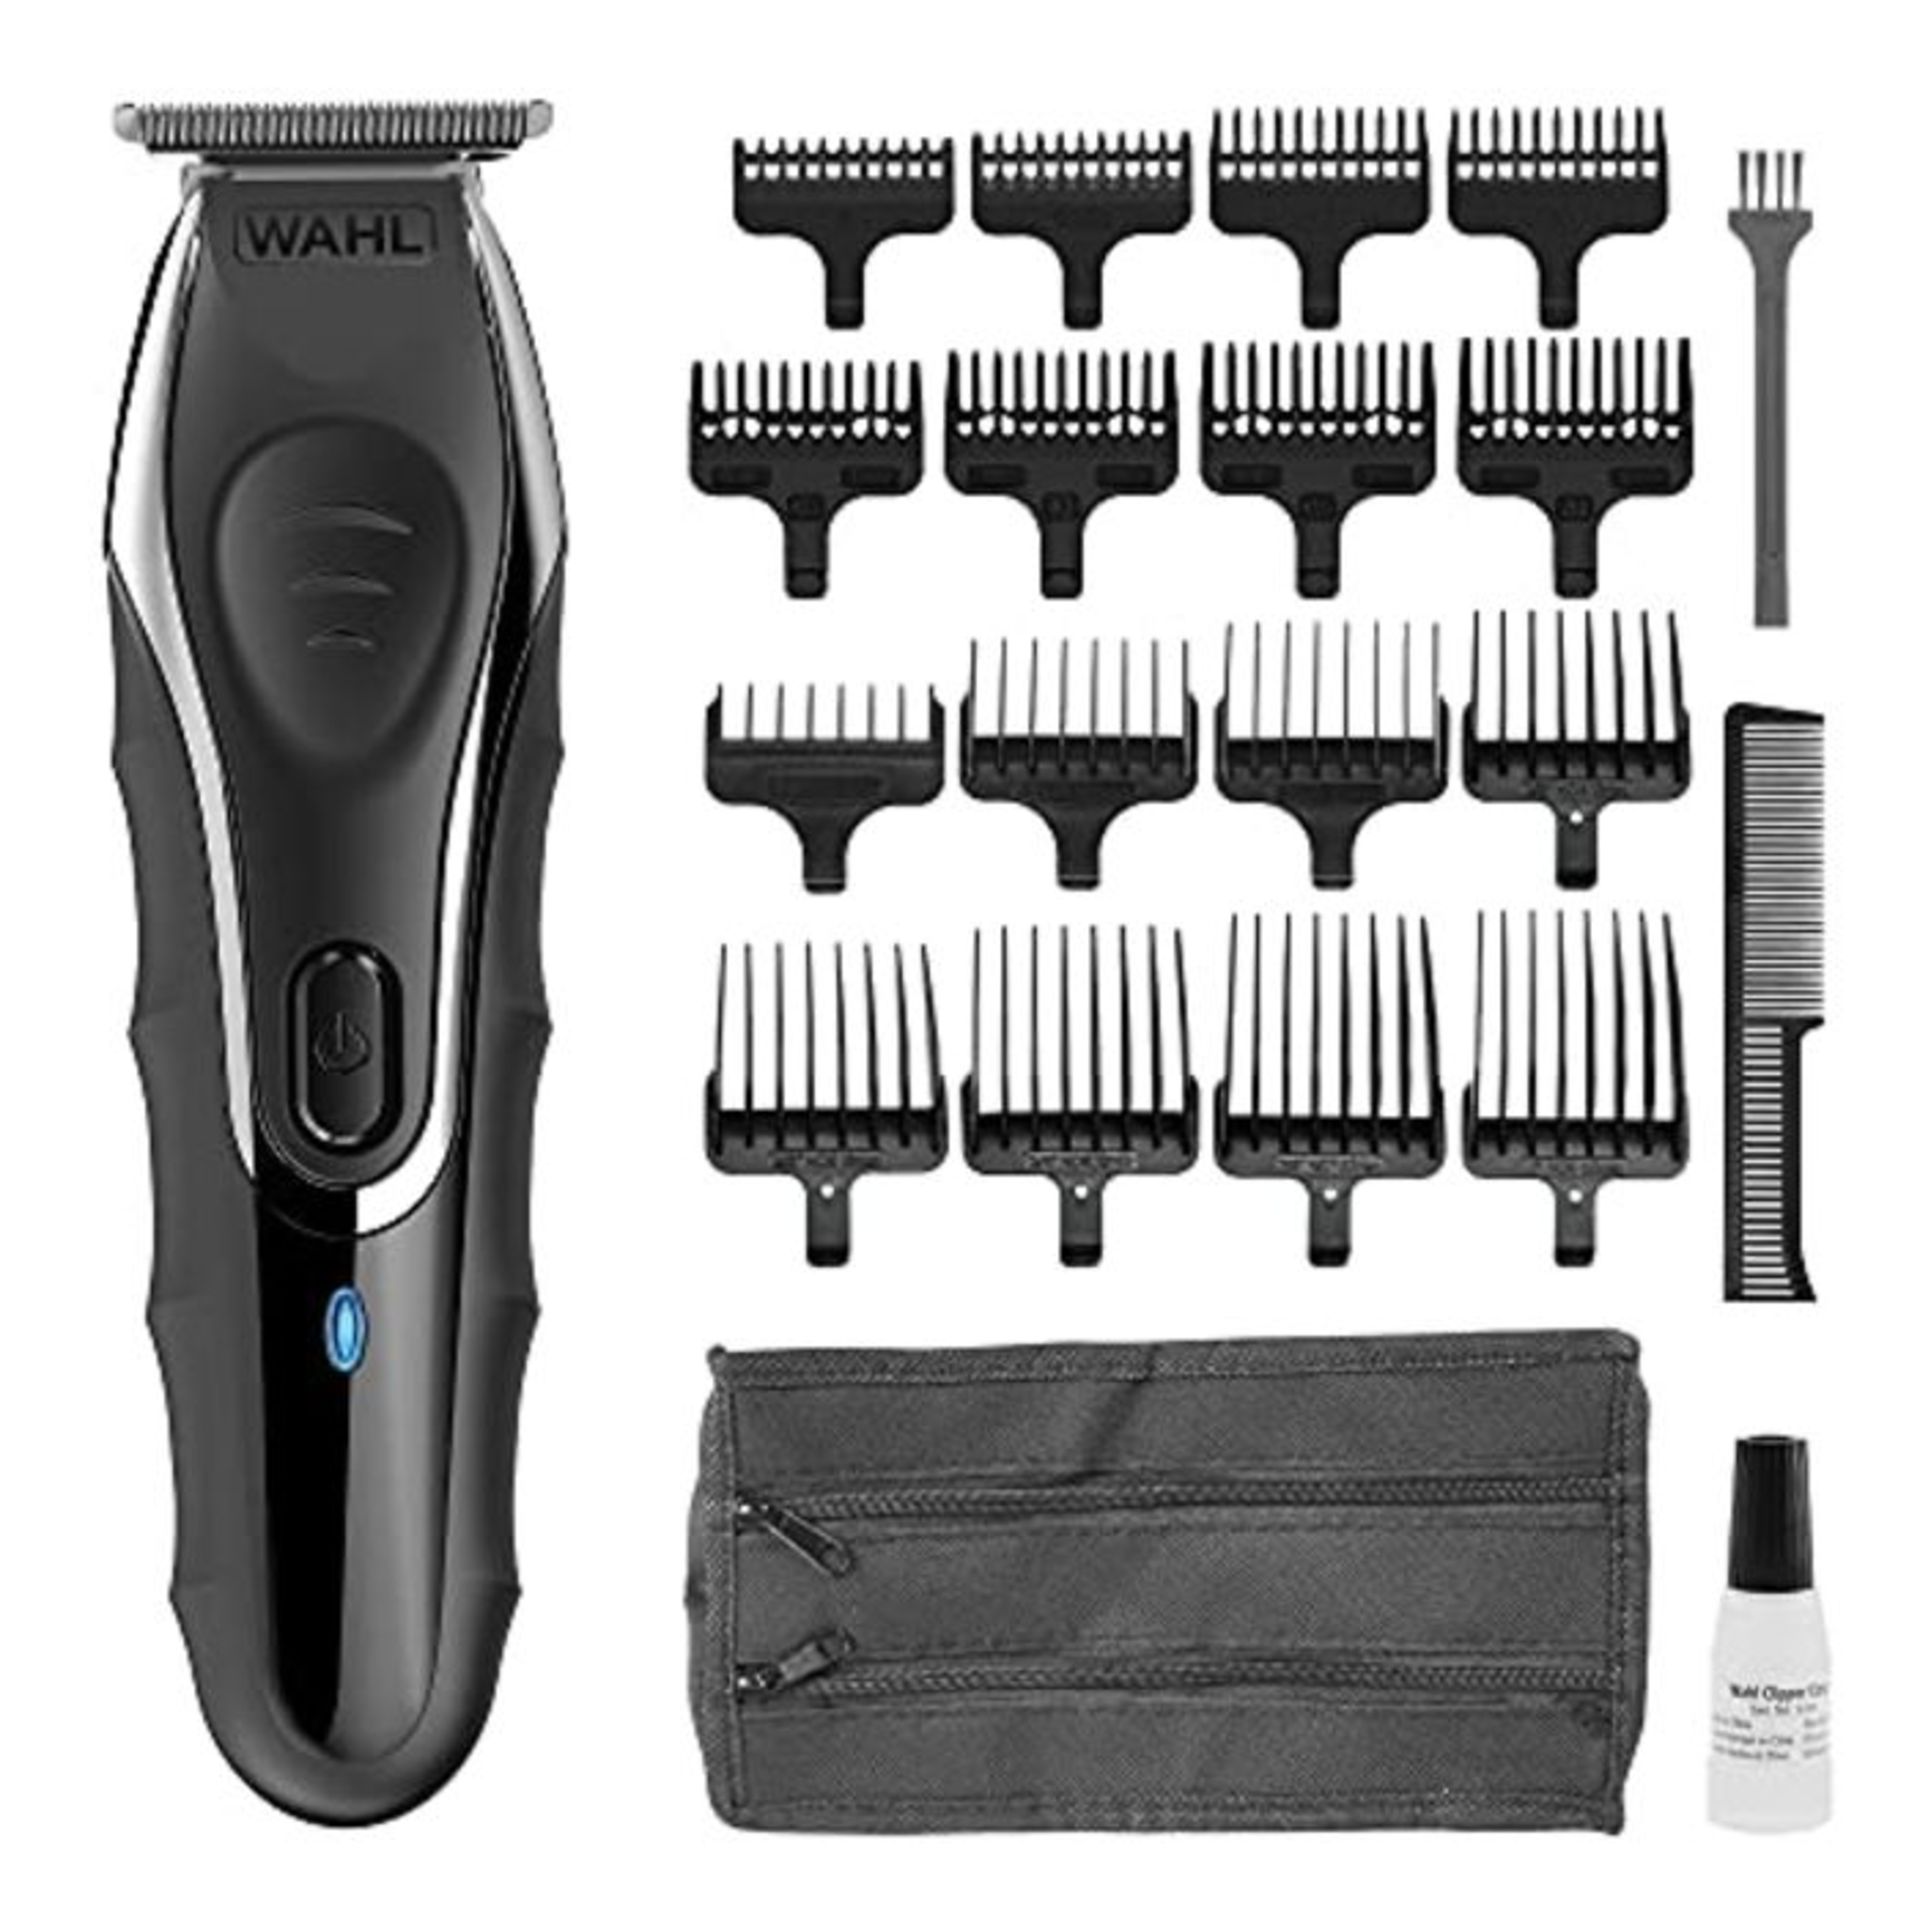 RRP £59.00 WAHL Beard Trimmer Men, Aqua Blade Hair Trimmers for Men, Stubble Trimmer, Male Groomi